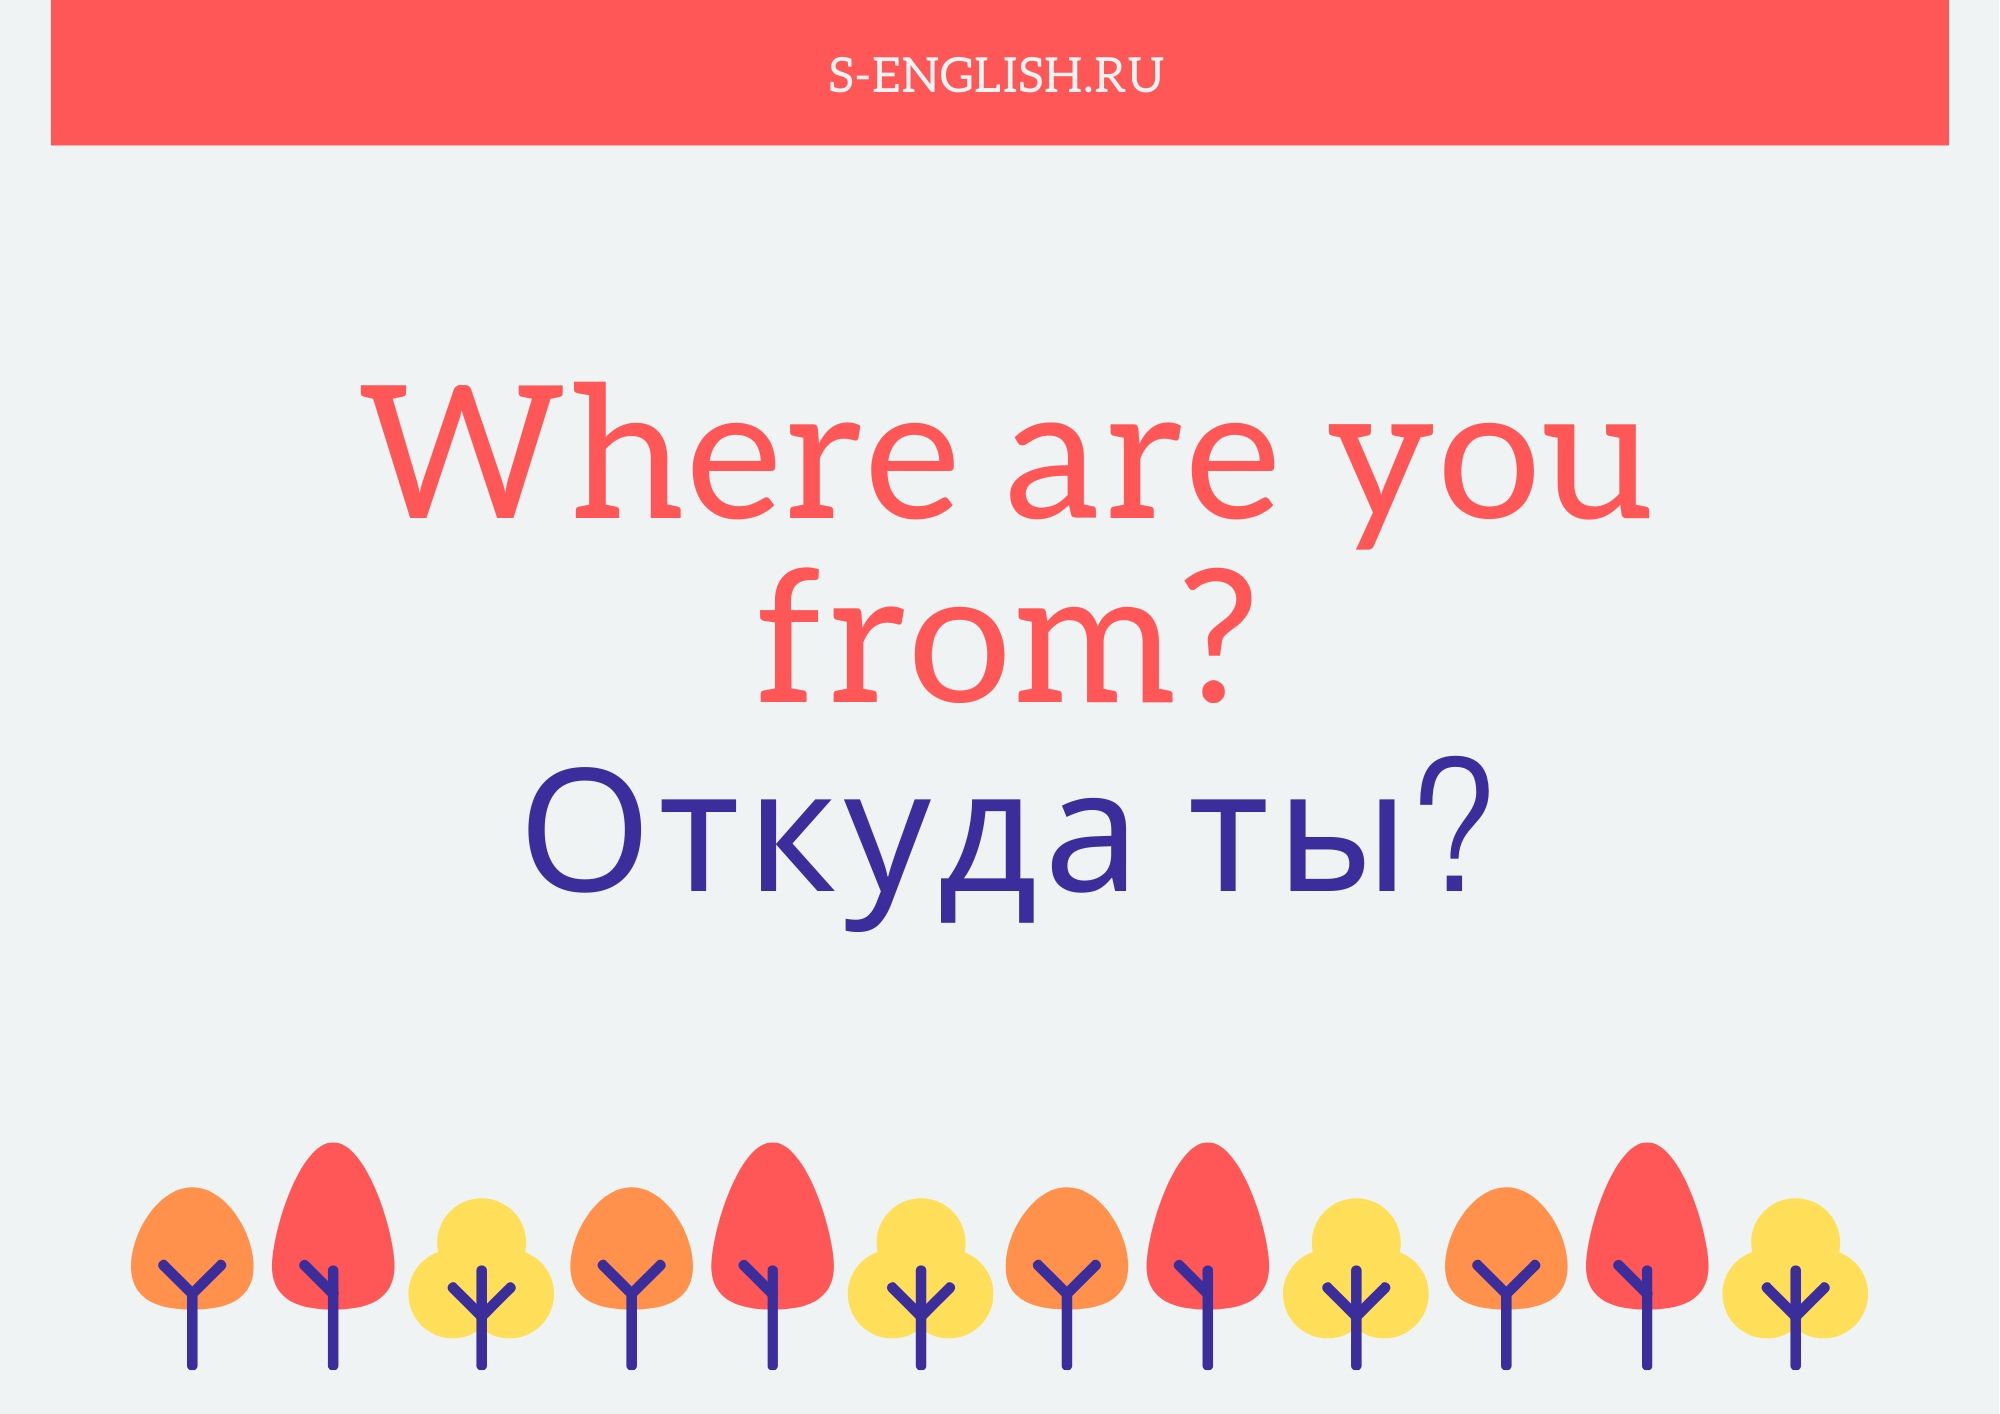 Thanks where are you from. Where are you from. Откуда ты на английском. Where is you from. Where are you from Song for Kids.